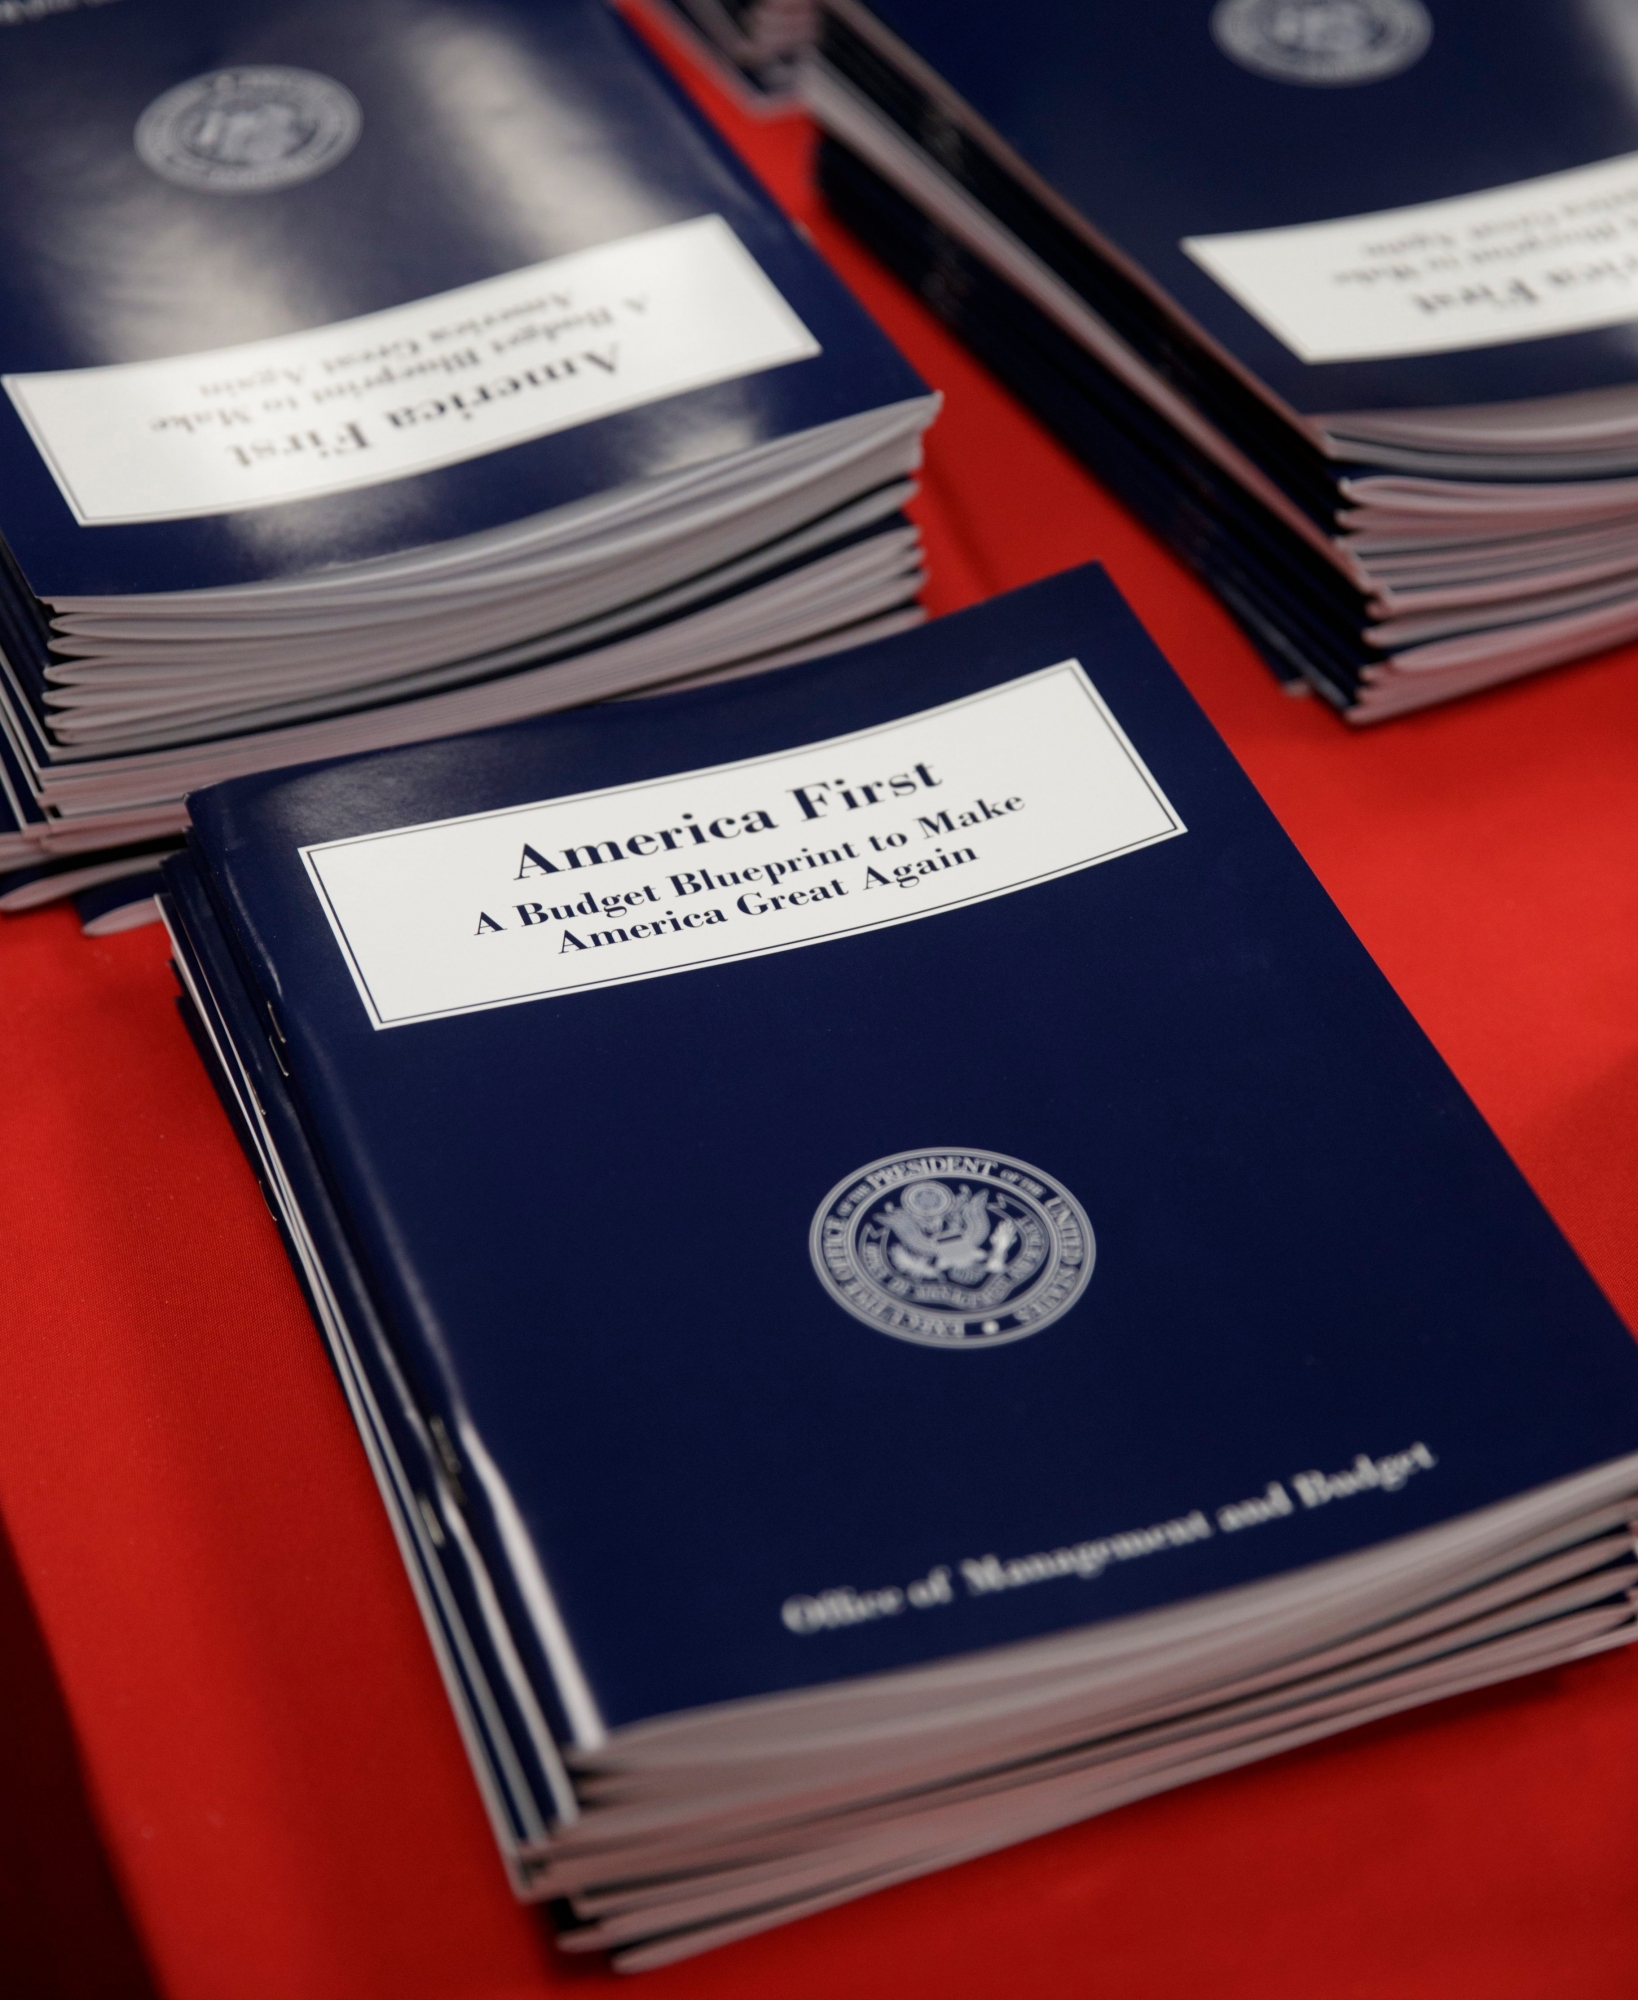 Copies of President Donald Trump's first budget are displayed at the Government Printing Office in Washington, Thursday, March, 16, 2017. Trump unveiled a $1.15 trillion budget on Thursday, a far-reaching overhaul of federal government spending that slashes many domestic programs to finance a significant increase in the military and make a down payment on a U.S.-Mexico border wall.  (AP Photo/J. Scott Applewhite) Trump Budget